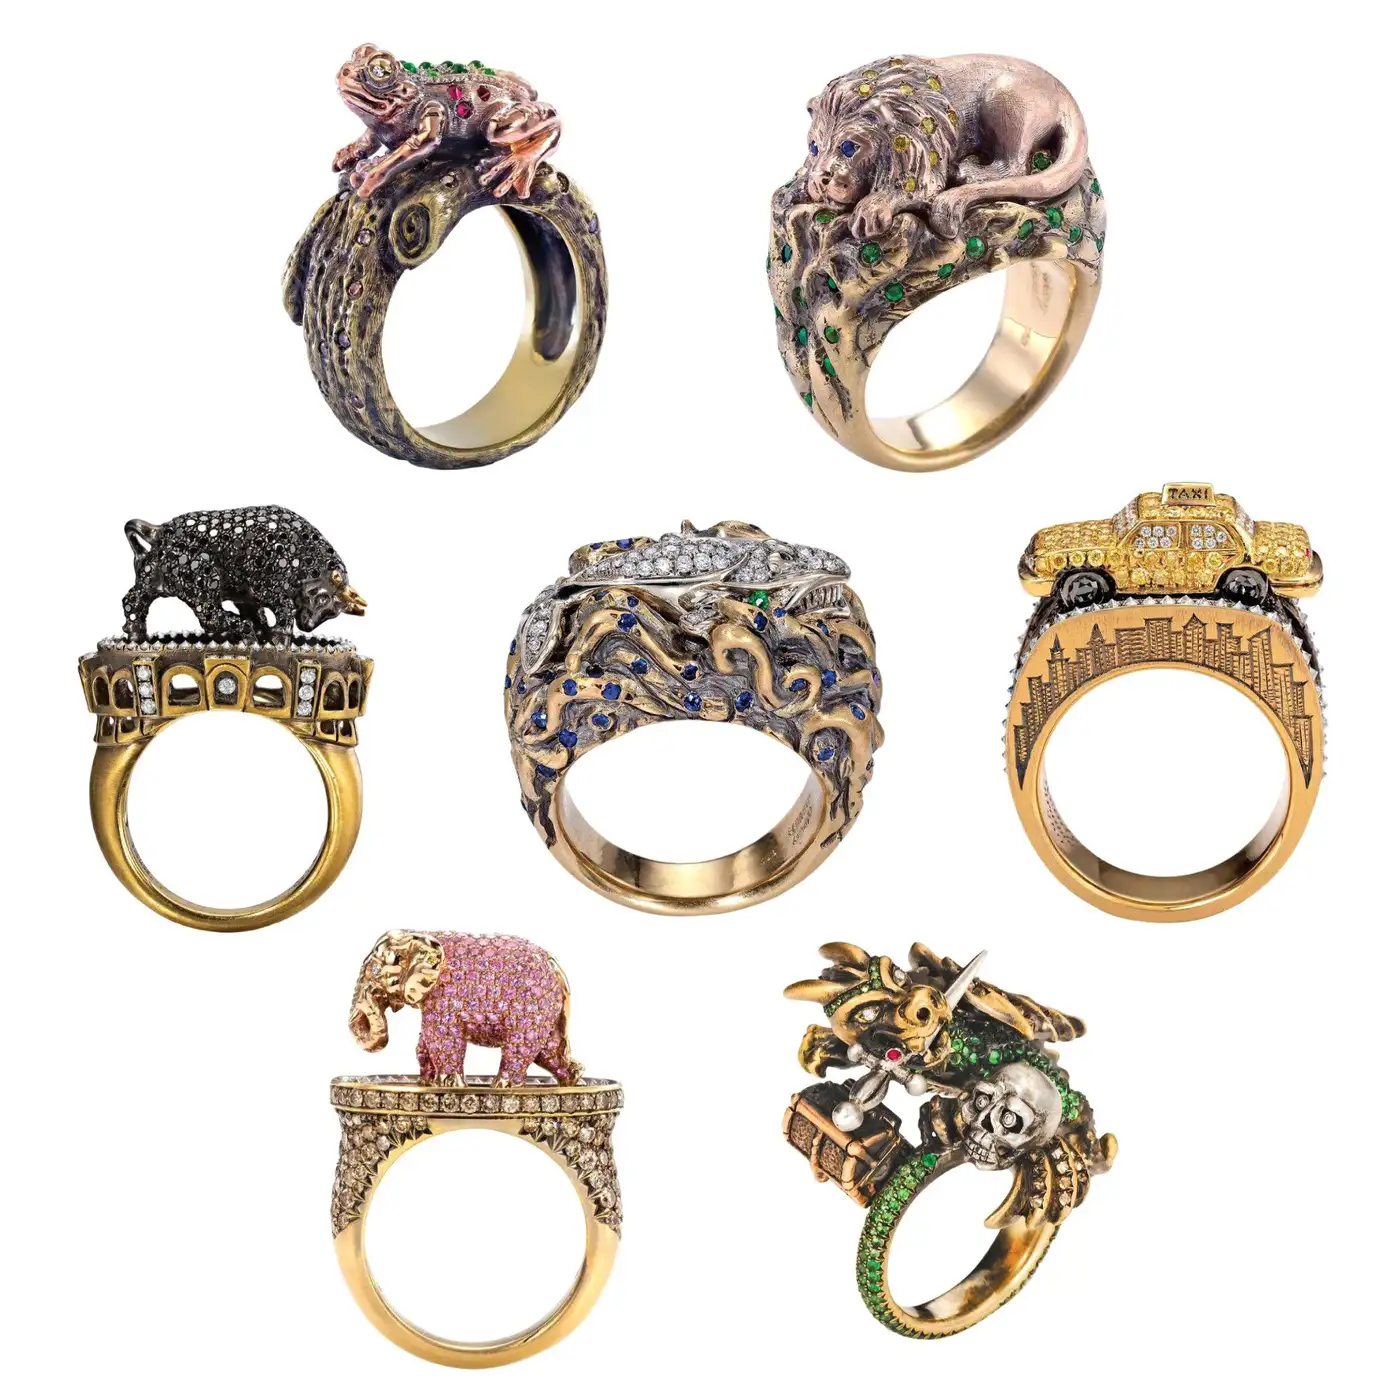 Wendy-Brandes-7-Ring-Diamond-and-Coloured-Gemstone-Animal-Design-Collection-1.webp